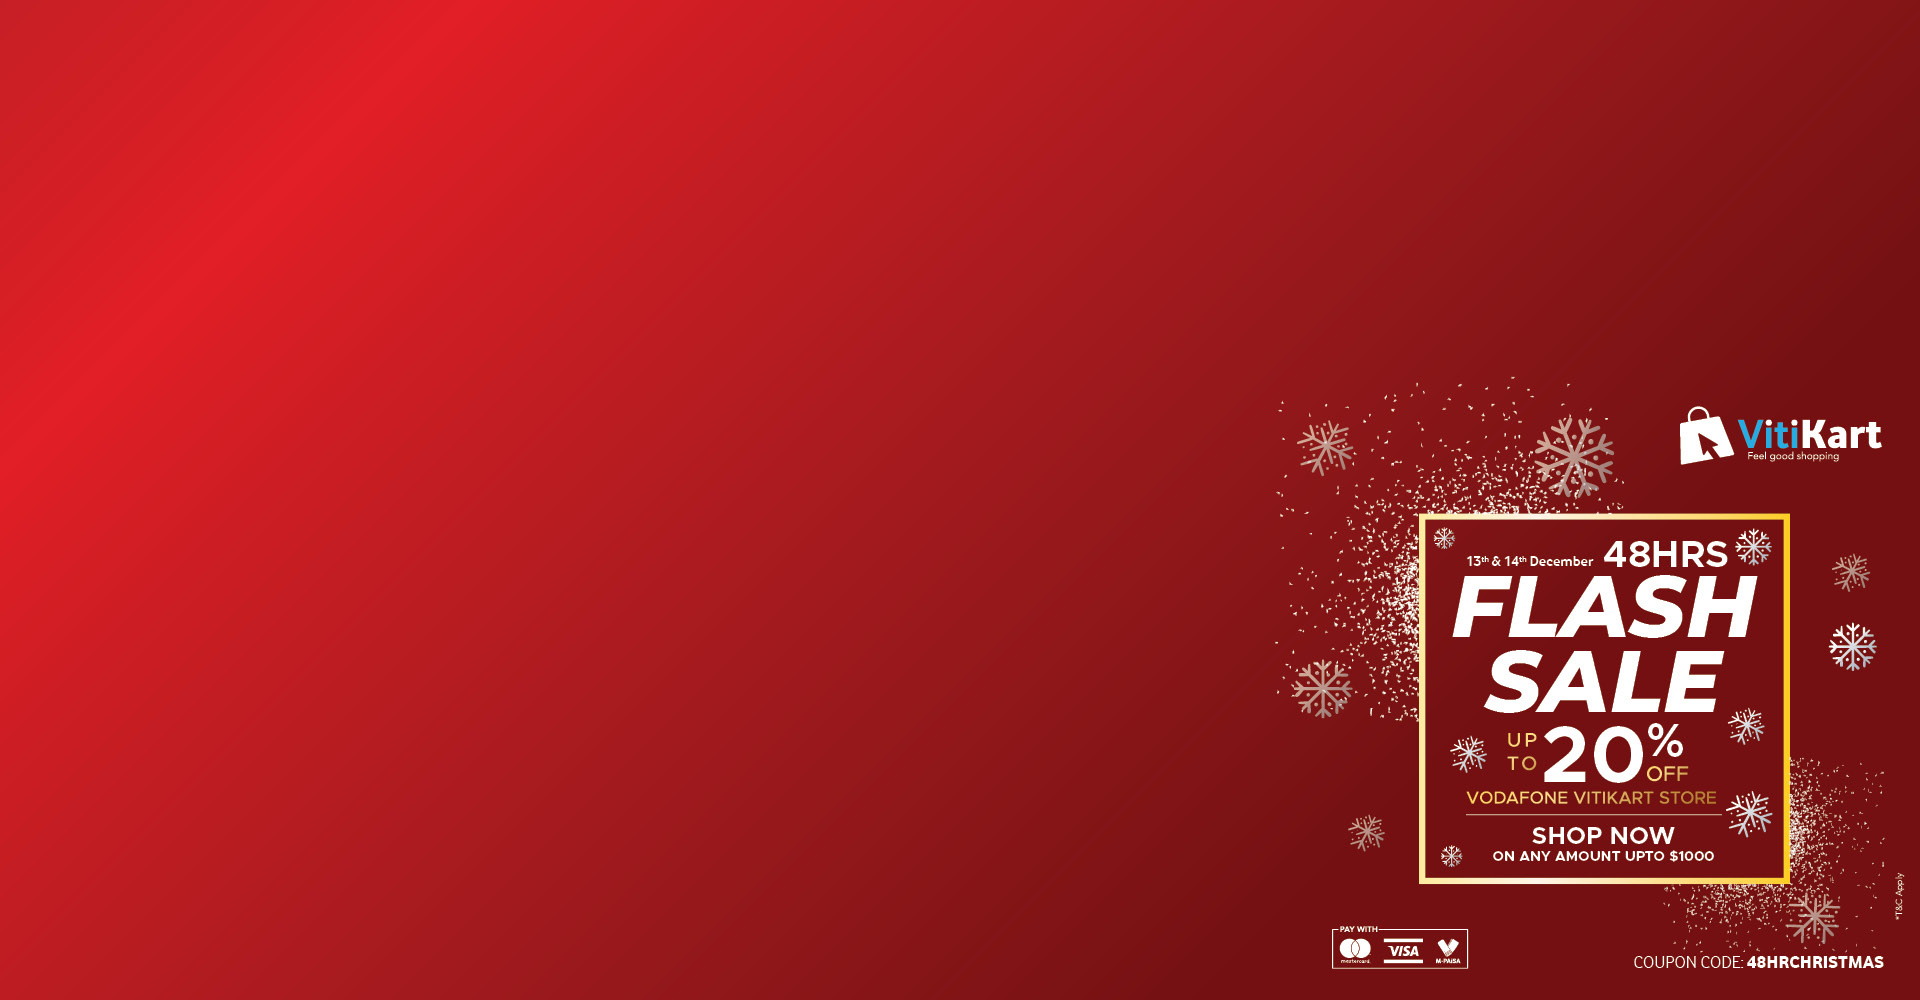 Vodafone Website - Home page banner 1920 x 1000 px